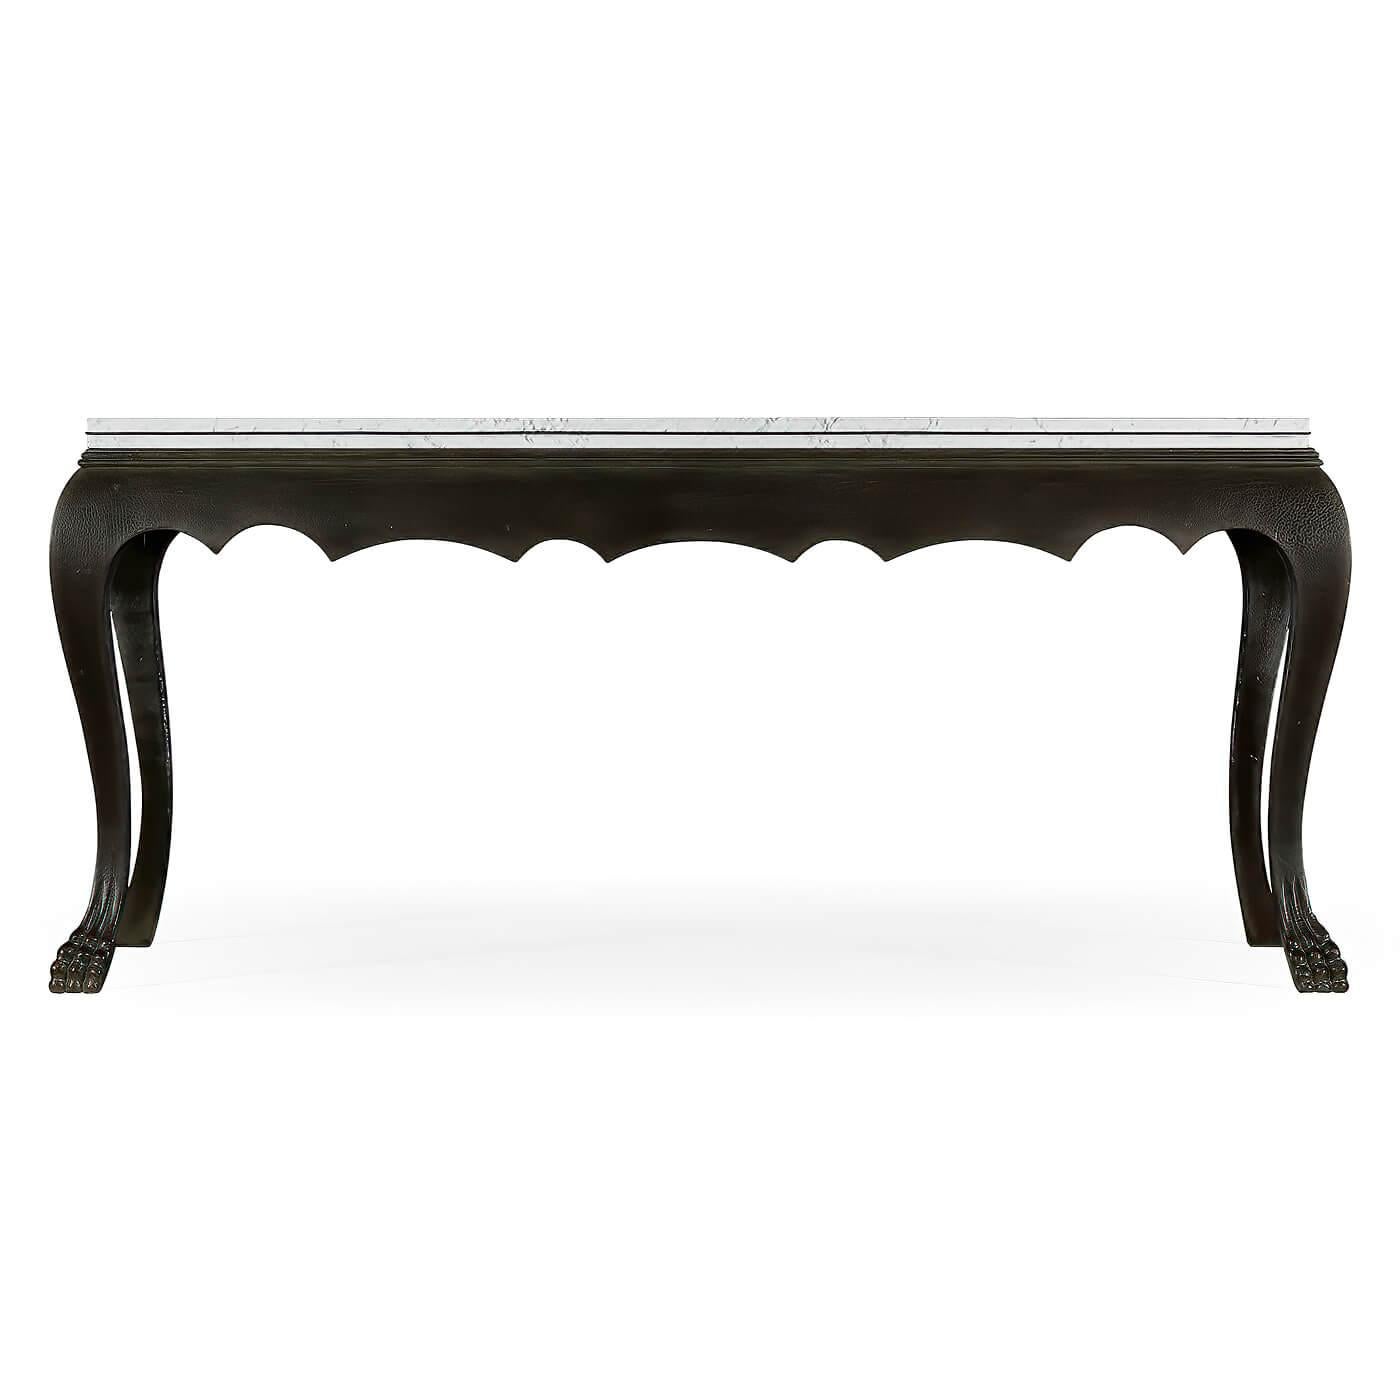 A Georgian style ebonized oak console table with a marble top, molded edge, scalloped apron on cabriole legs and carved paw feet.

Dimensions: 68 1/2